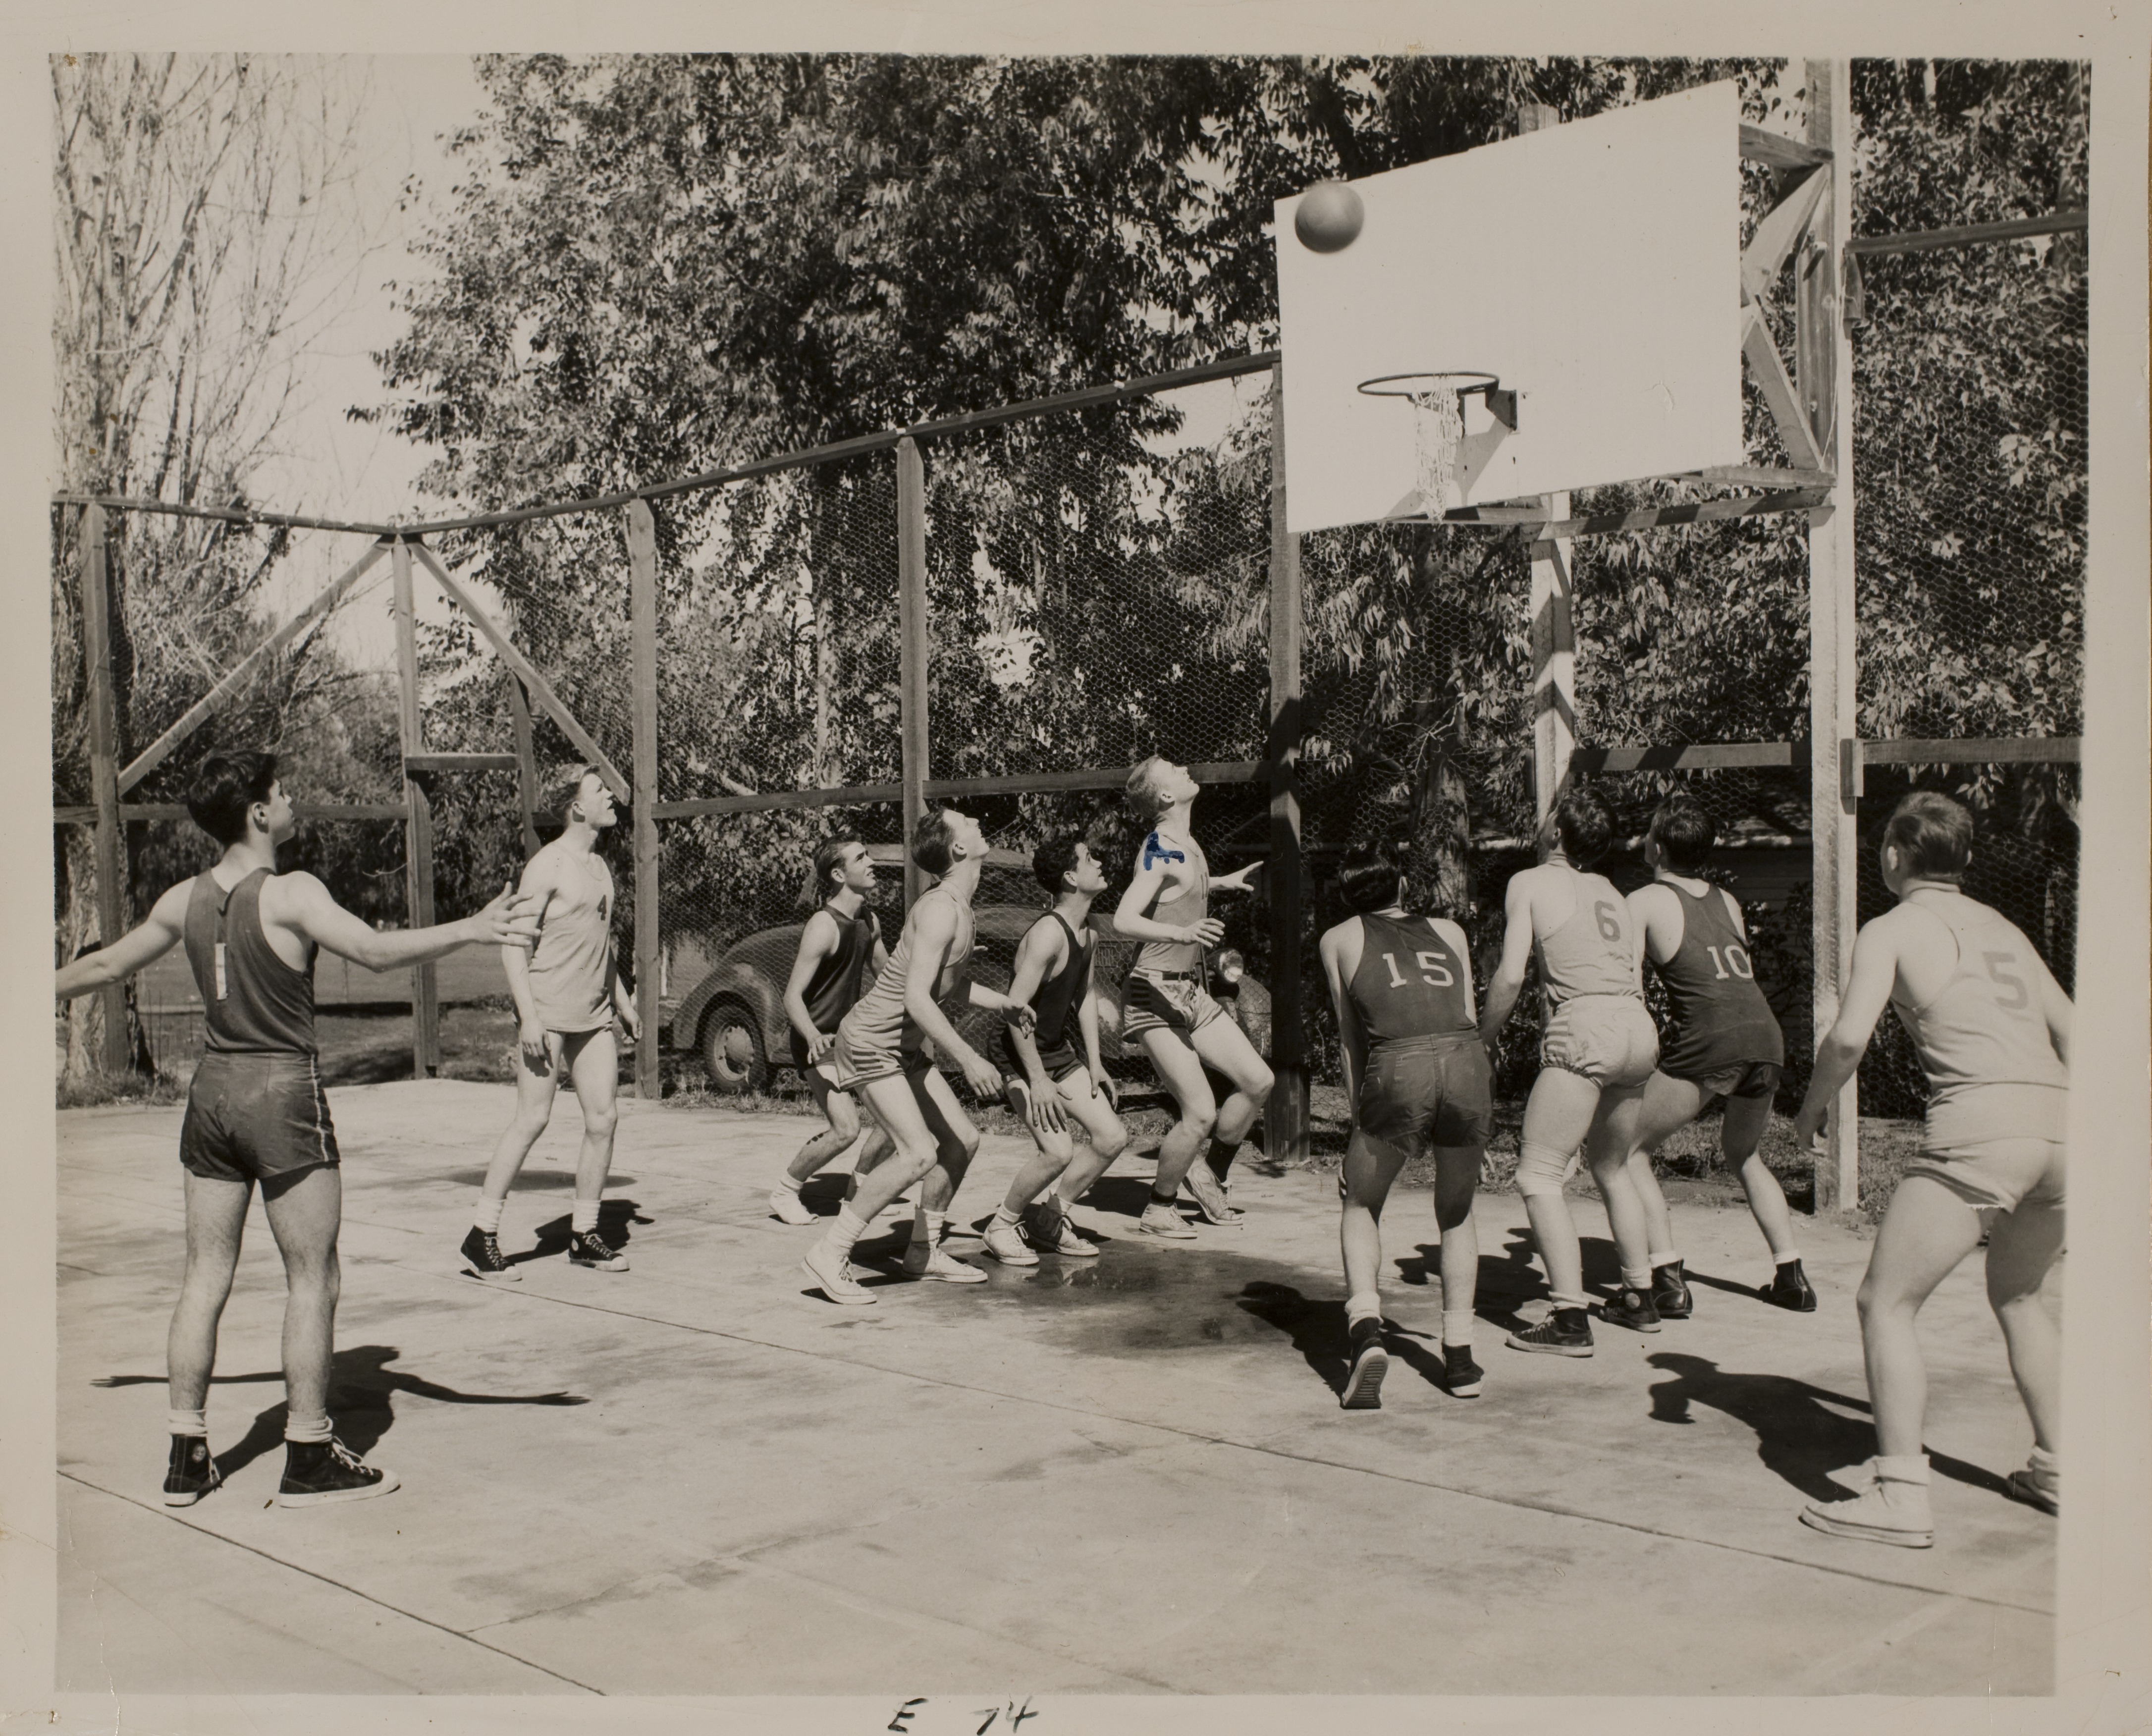 Rex Anthony Bell, Jr. (sixth from the right) playing basketball with other teens: photographic print